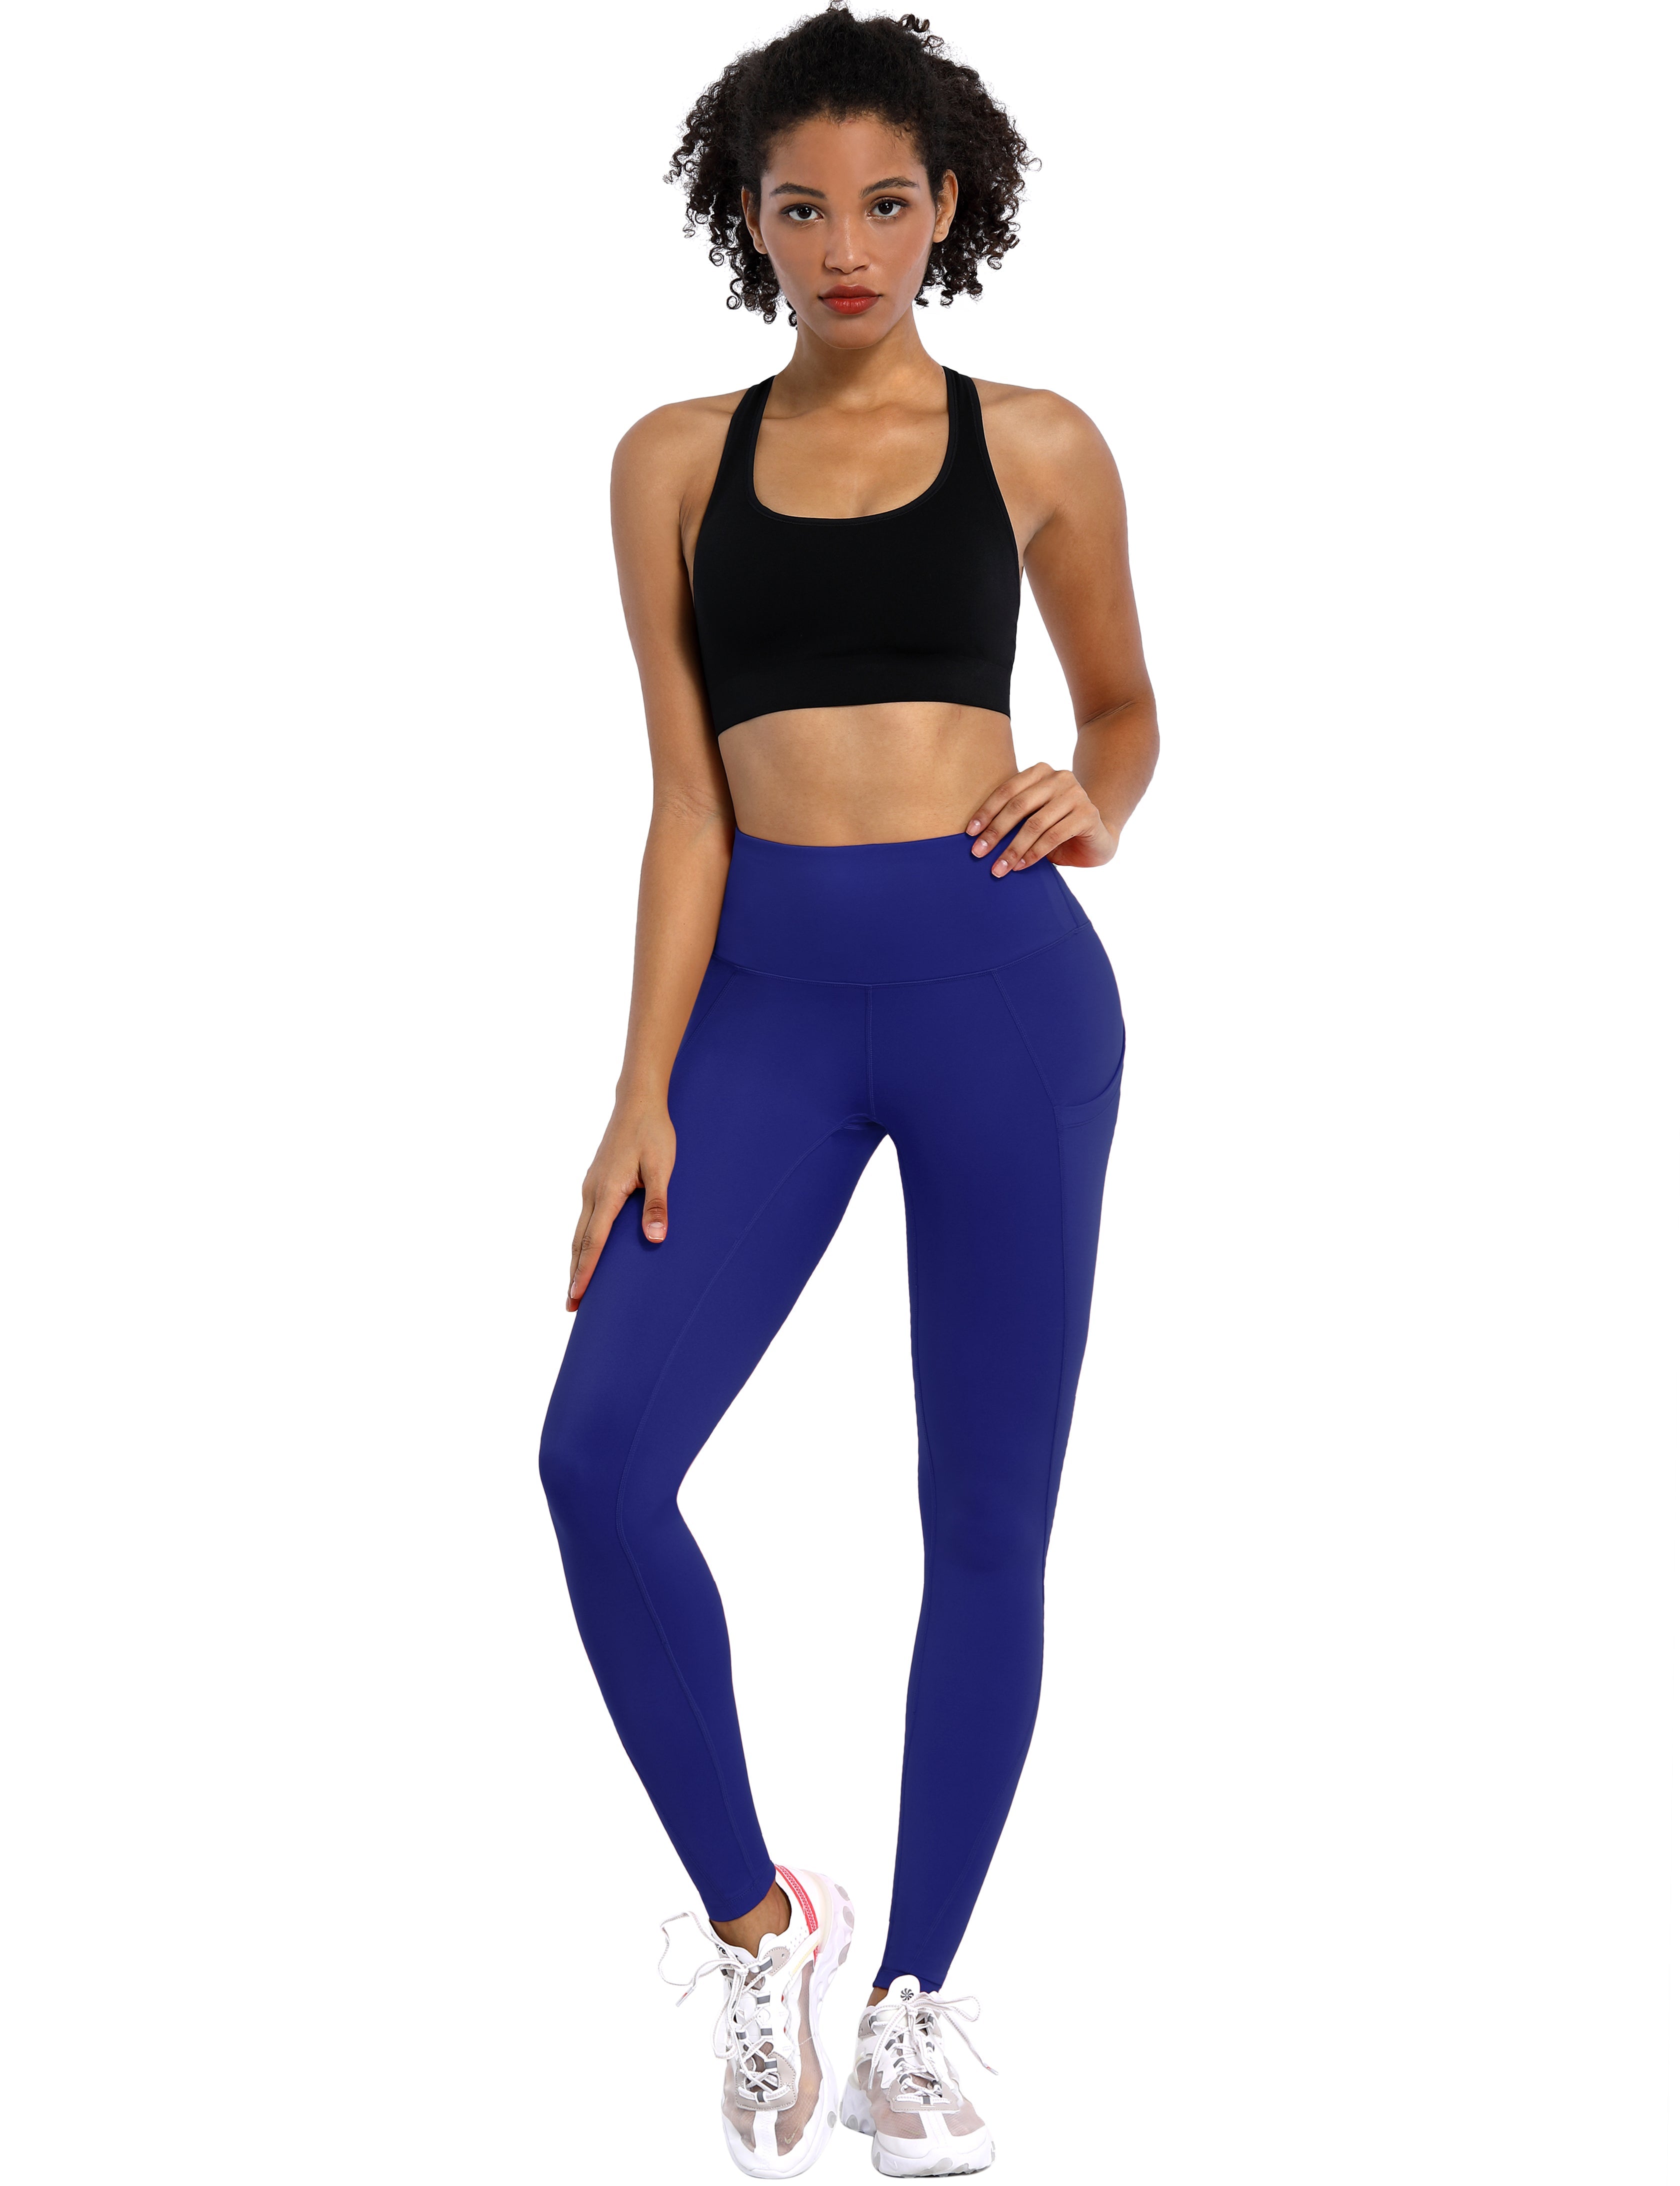 High Waist Side Pockets Pilates Pants navy 75% Nylon, 25% Spandex Fabric doesn't attract lint easily 4-way stretch No see-through Moisture-wicking Tummy control Inner pocket